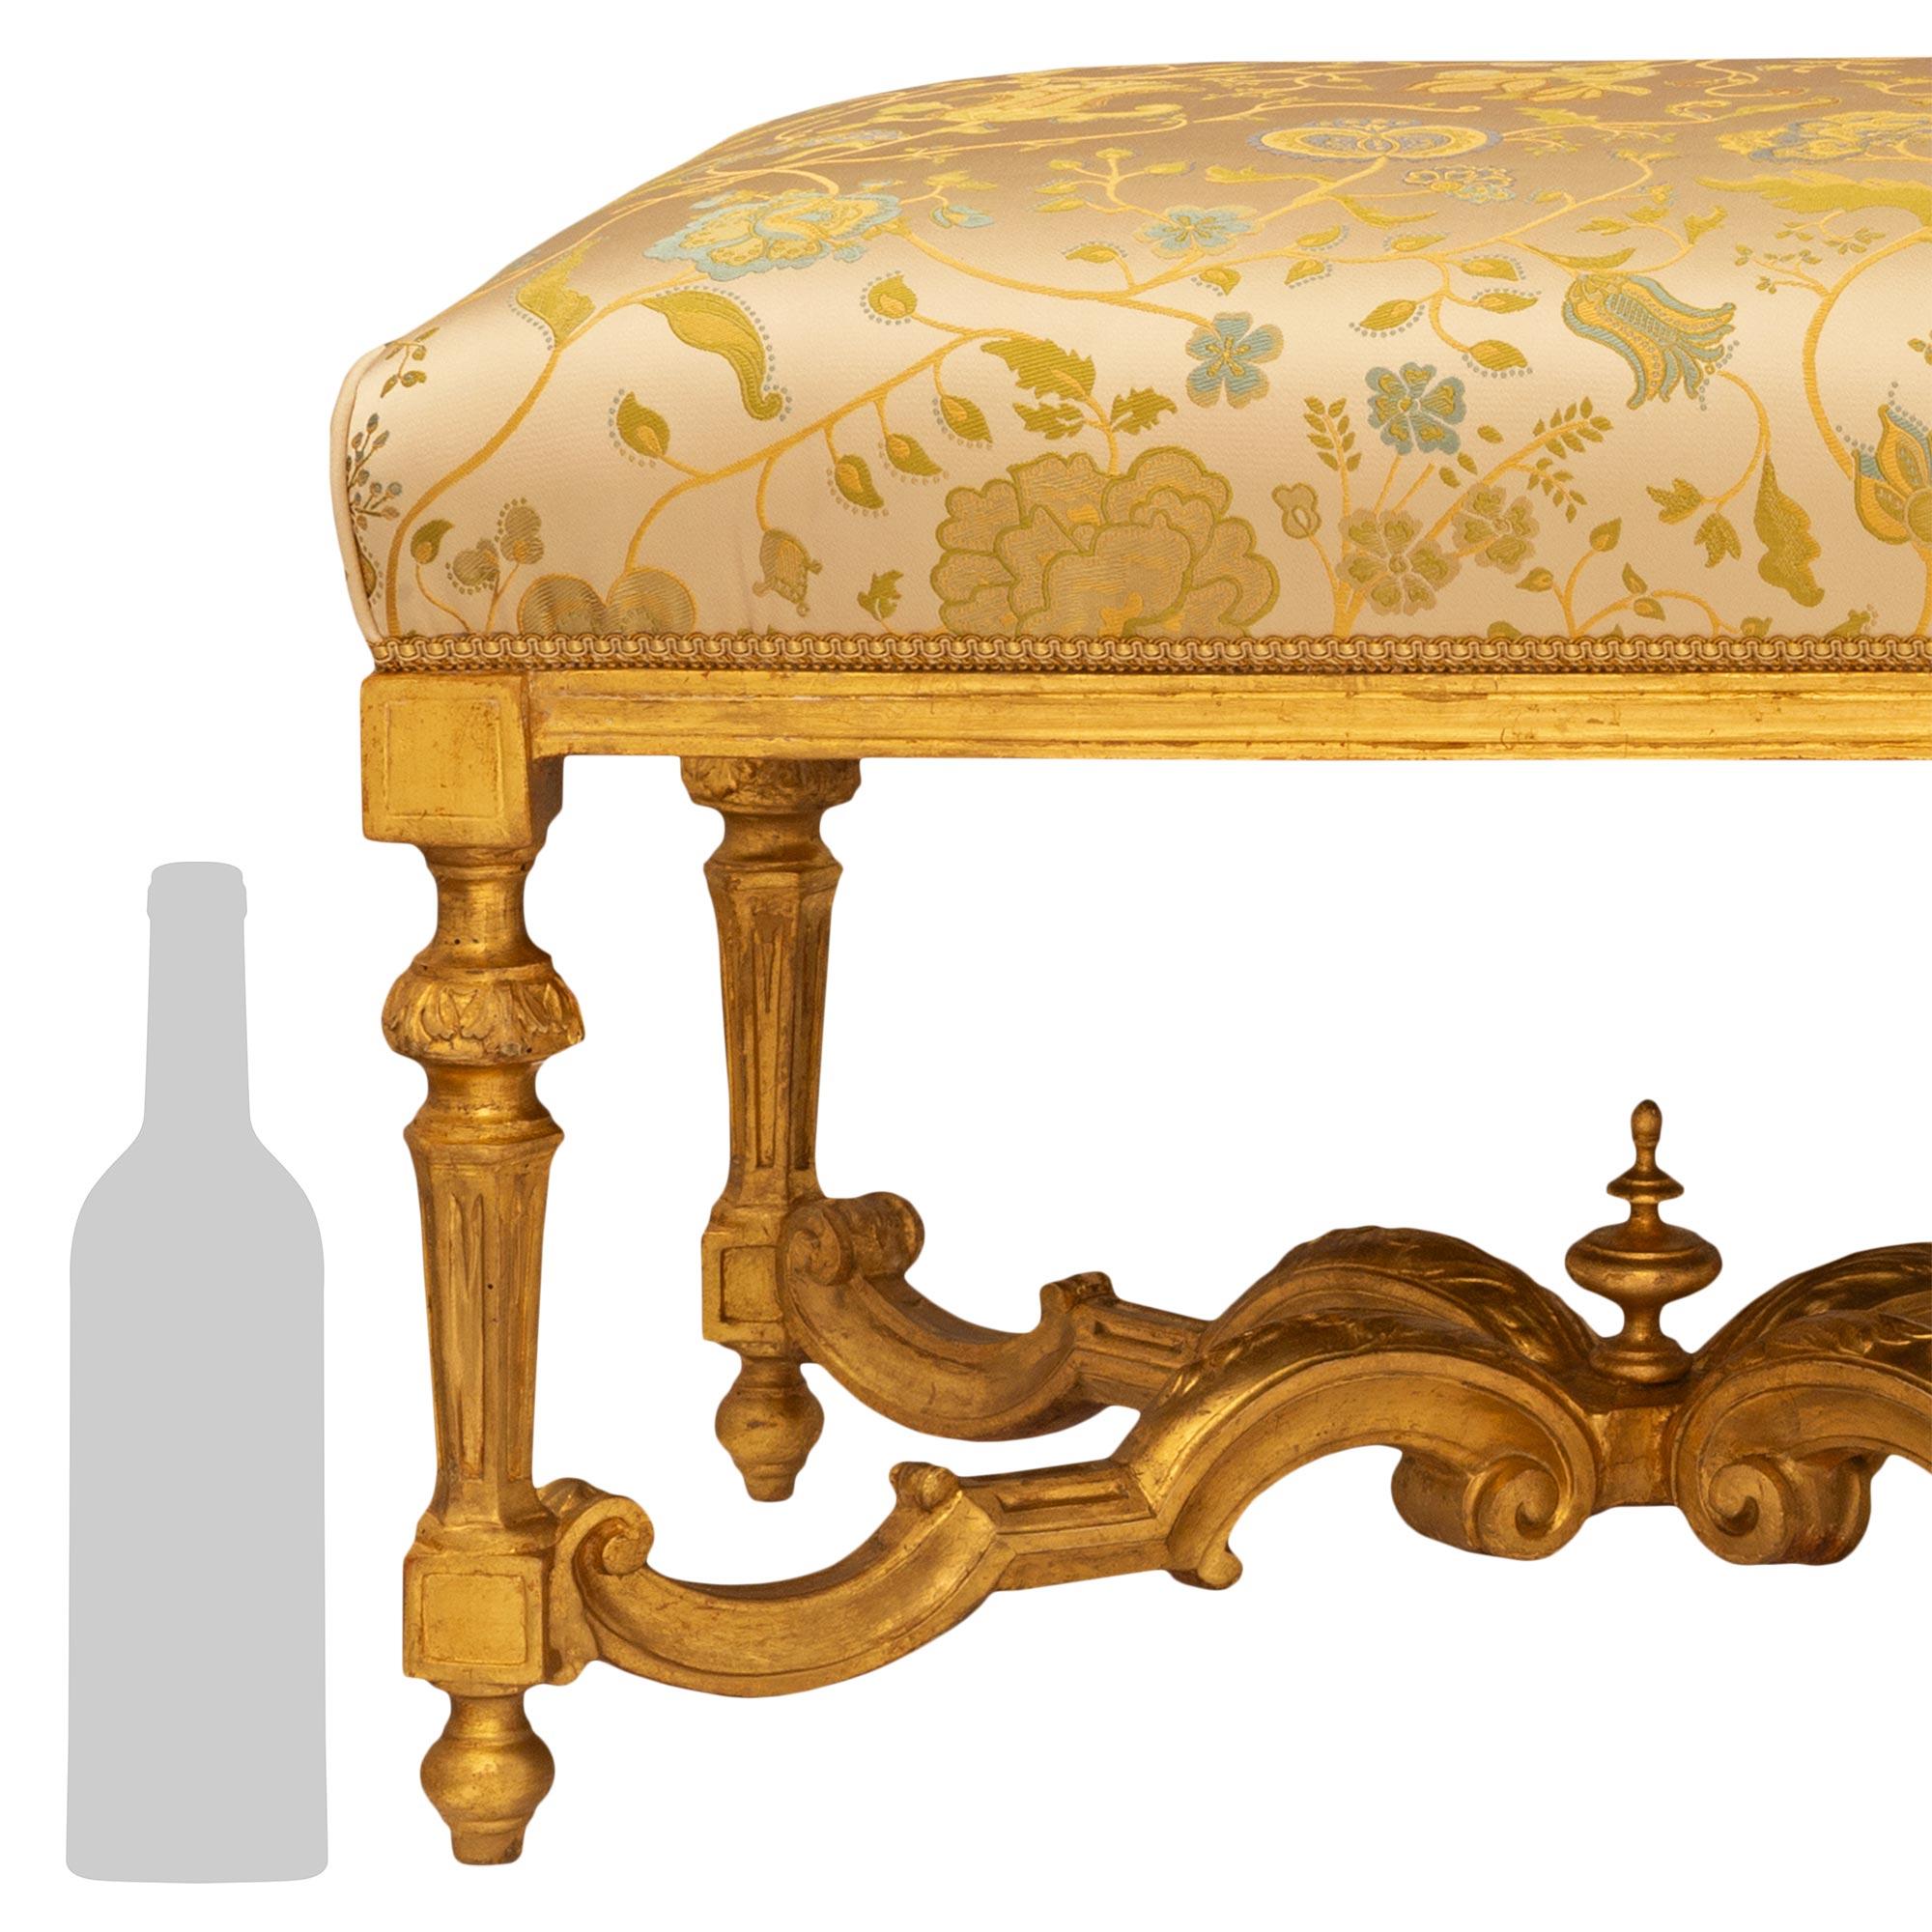 An elegant Italian early 18th century Louis XIV period giltwood bench. The long bench is raised on six legs with topie shape feet below a circular fluted tapered column, foliate decorated ball, and square block above. The legs are joined by an X